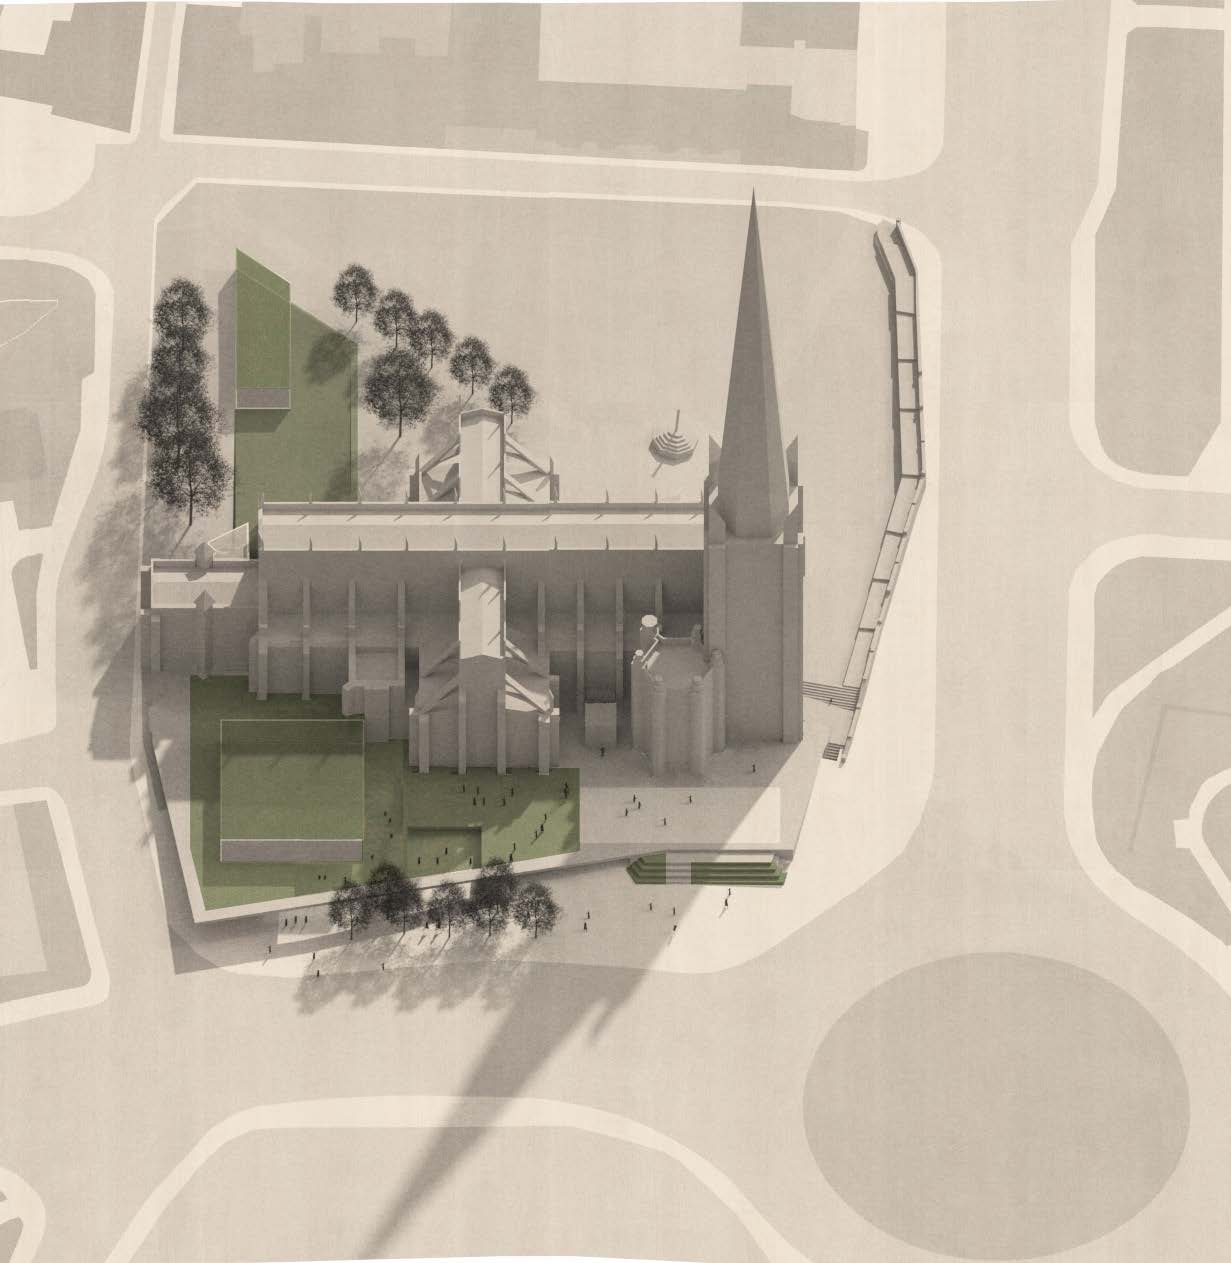 Development proposals for St Mary Redcliffe Church